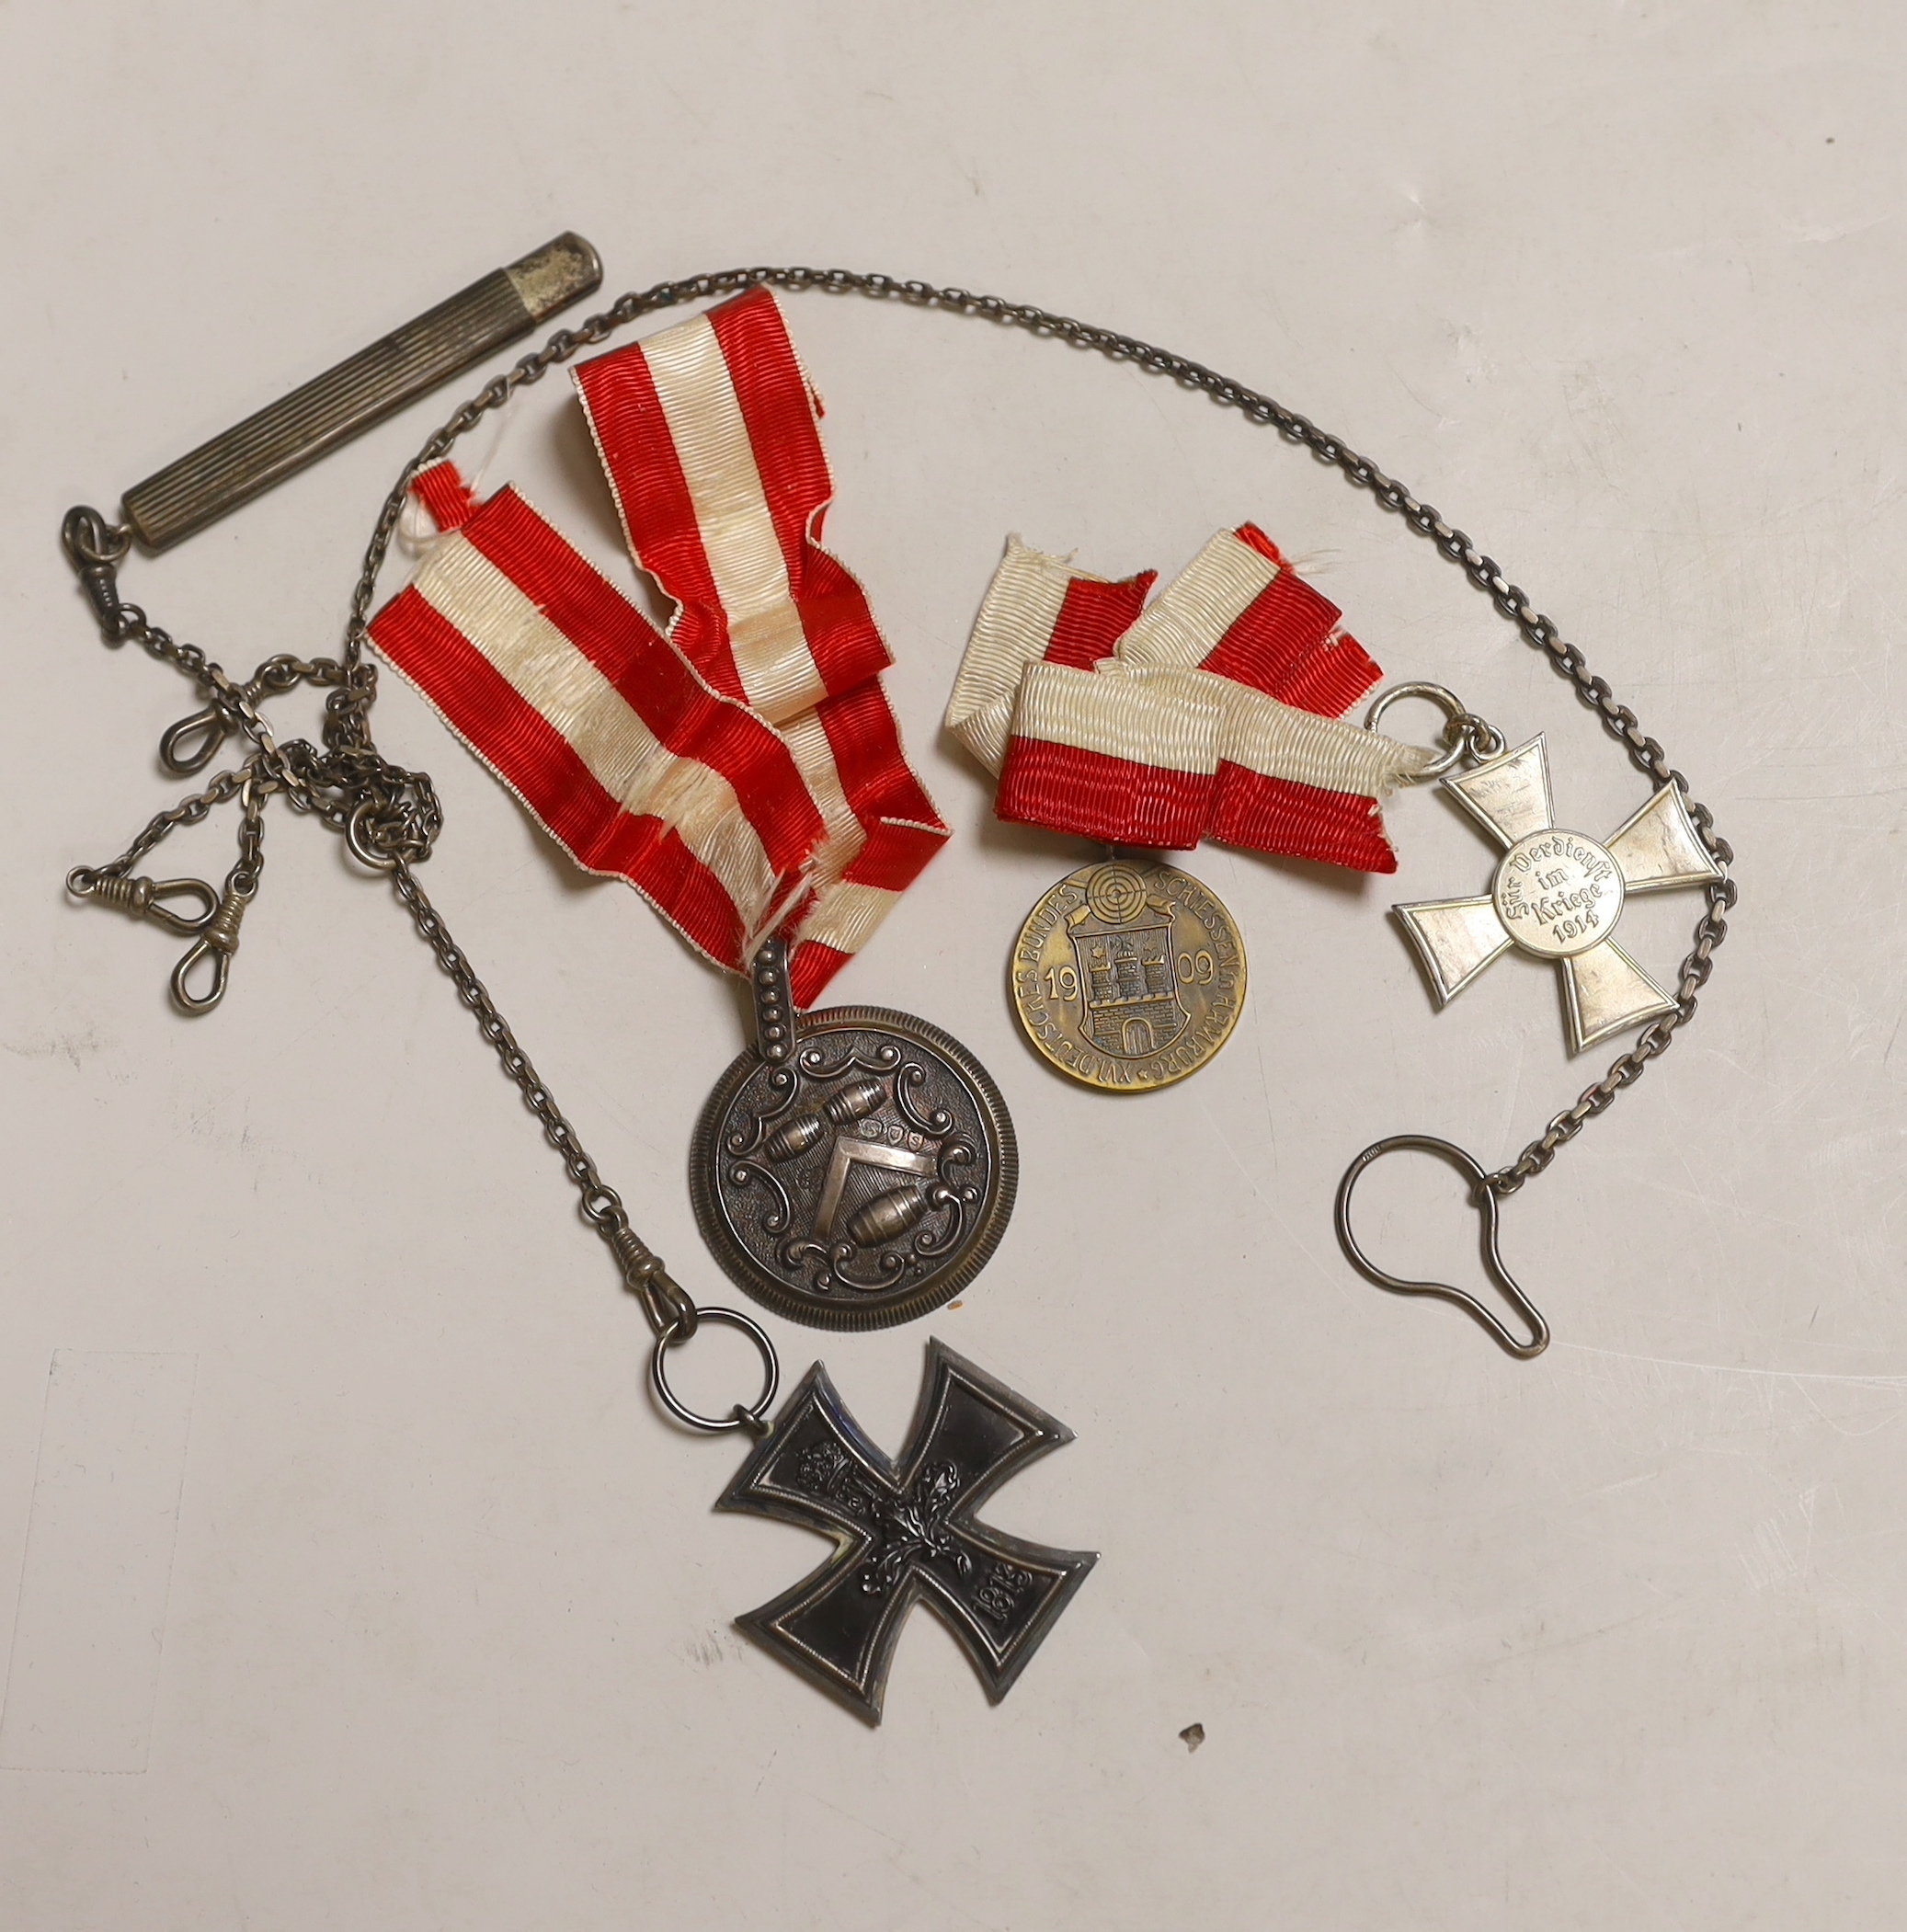 Four German medals including an iron cross